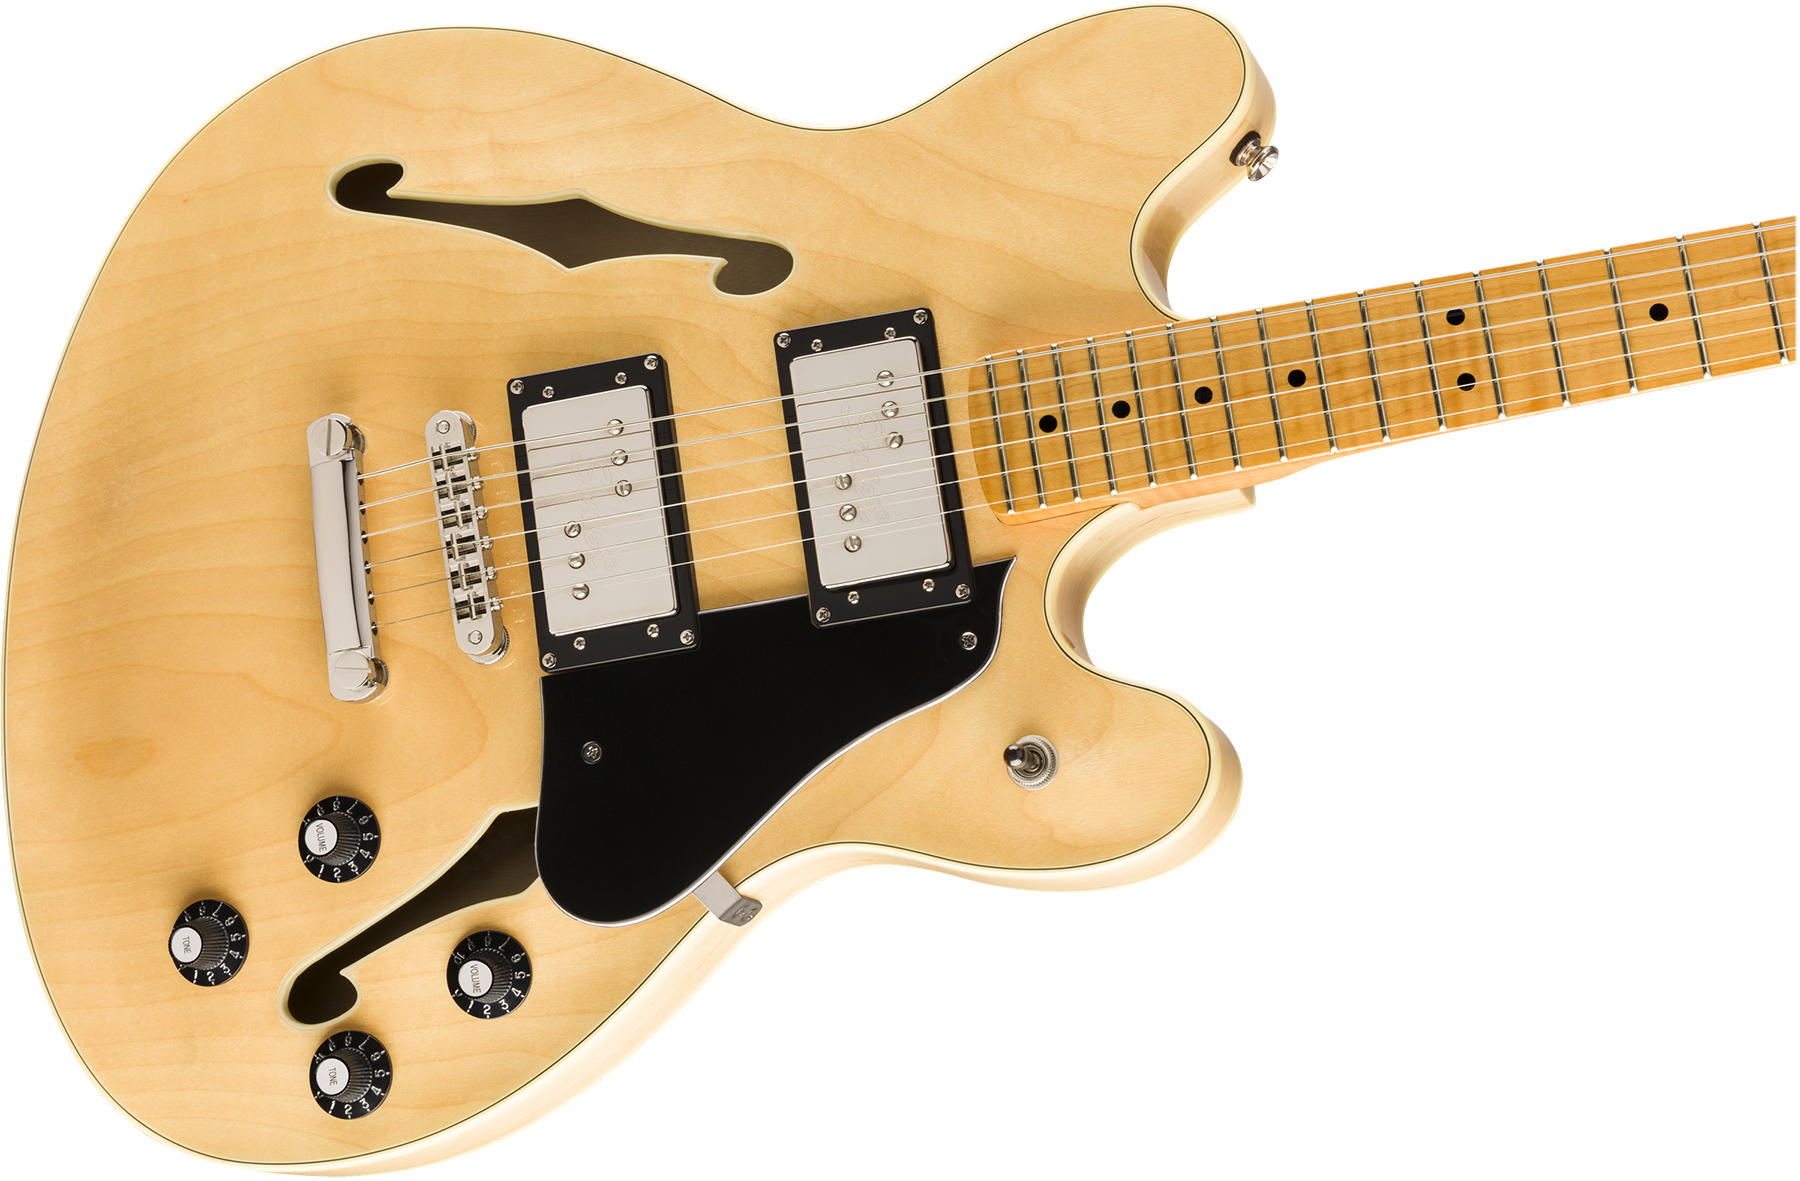 Squier Starcaster Classic Vibe 2019 Hh Ht Mn - Natural - Semi-hollow electric guitar - Variation 2